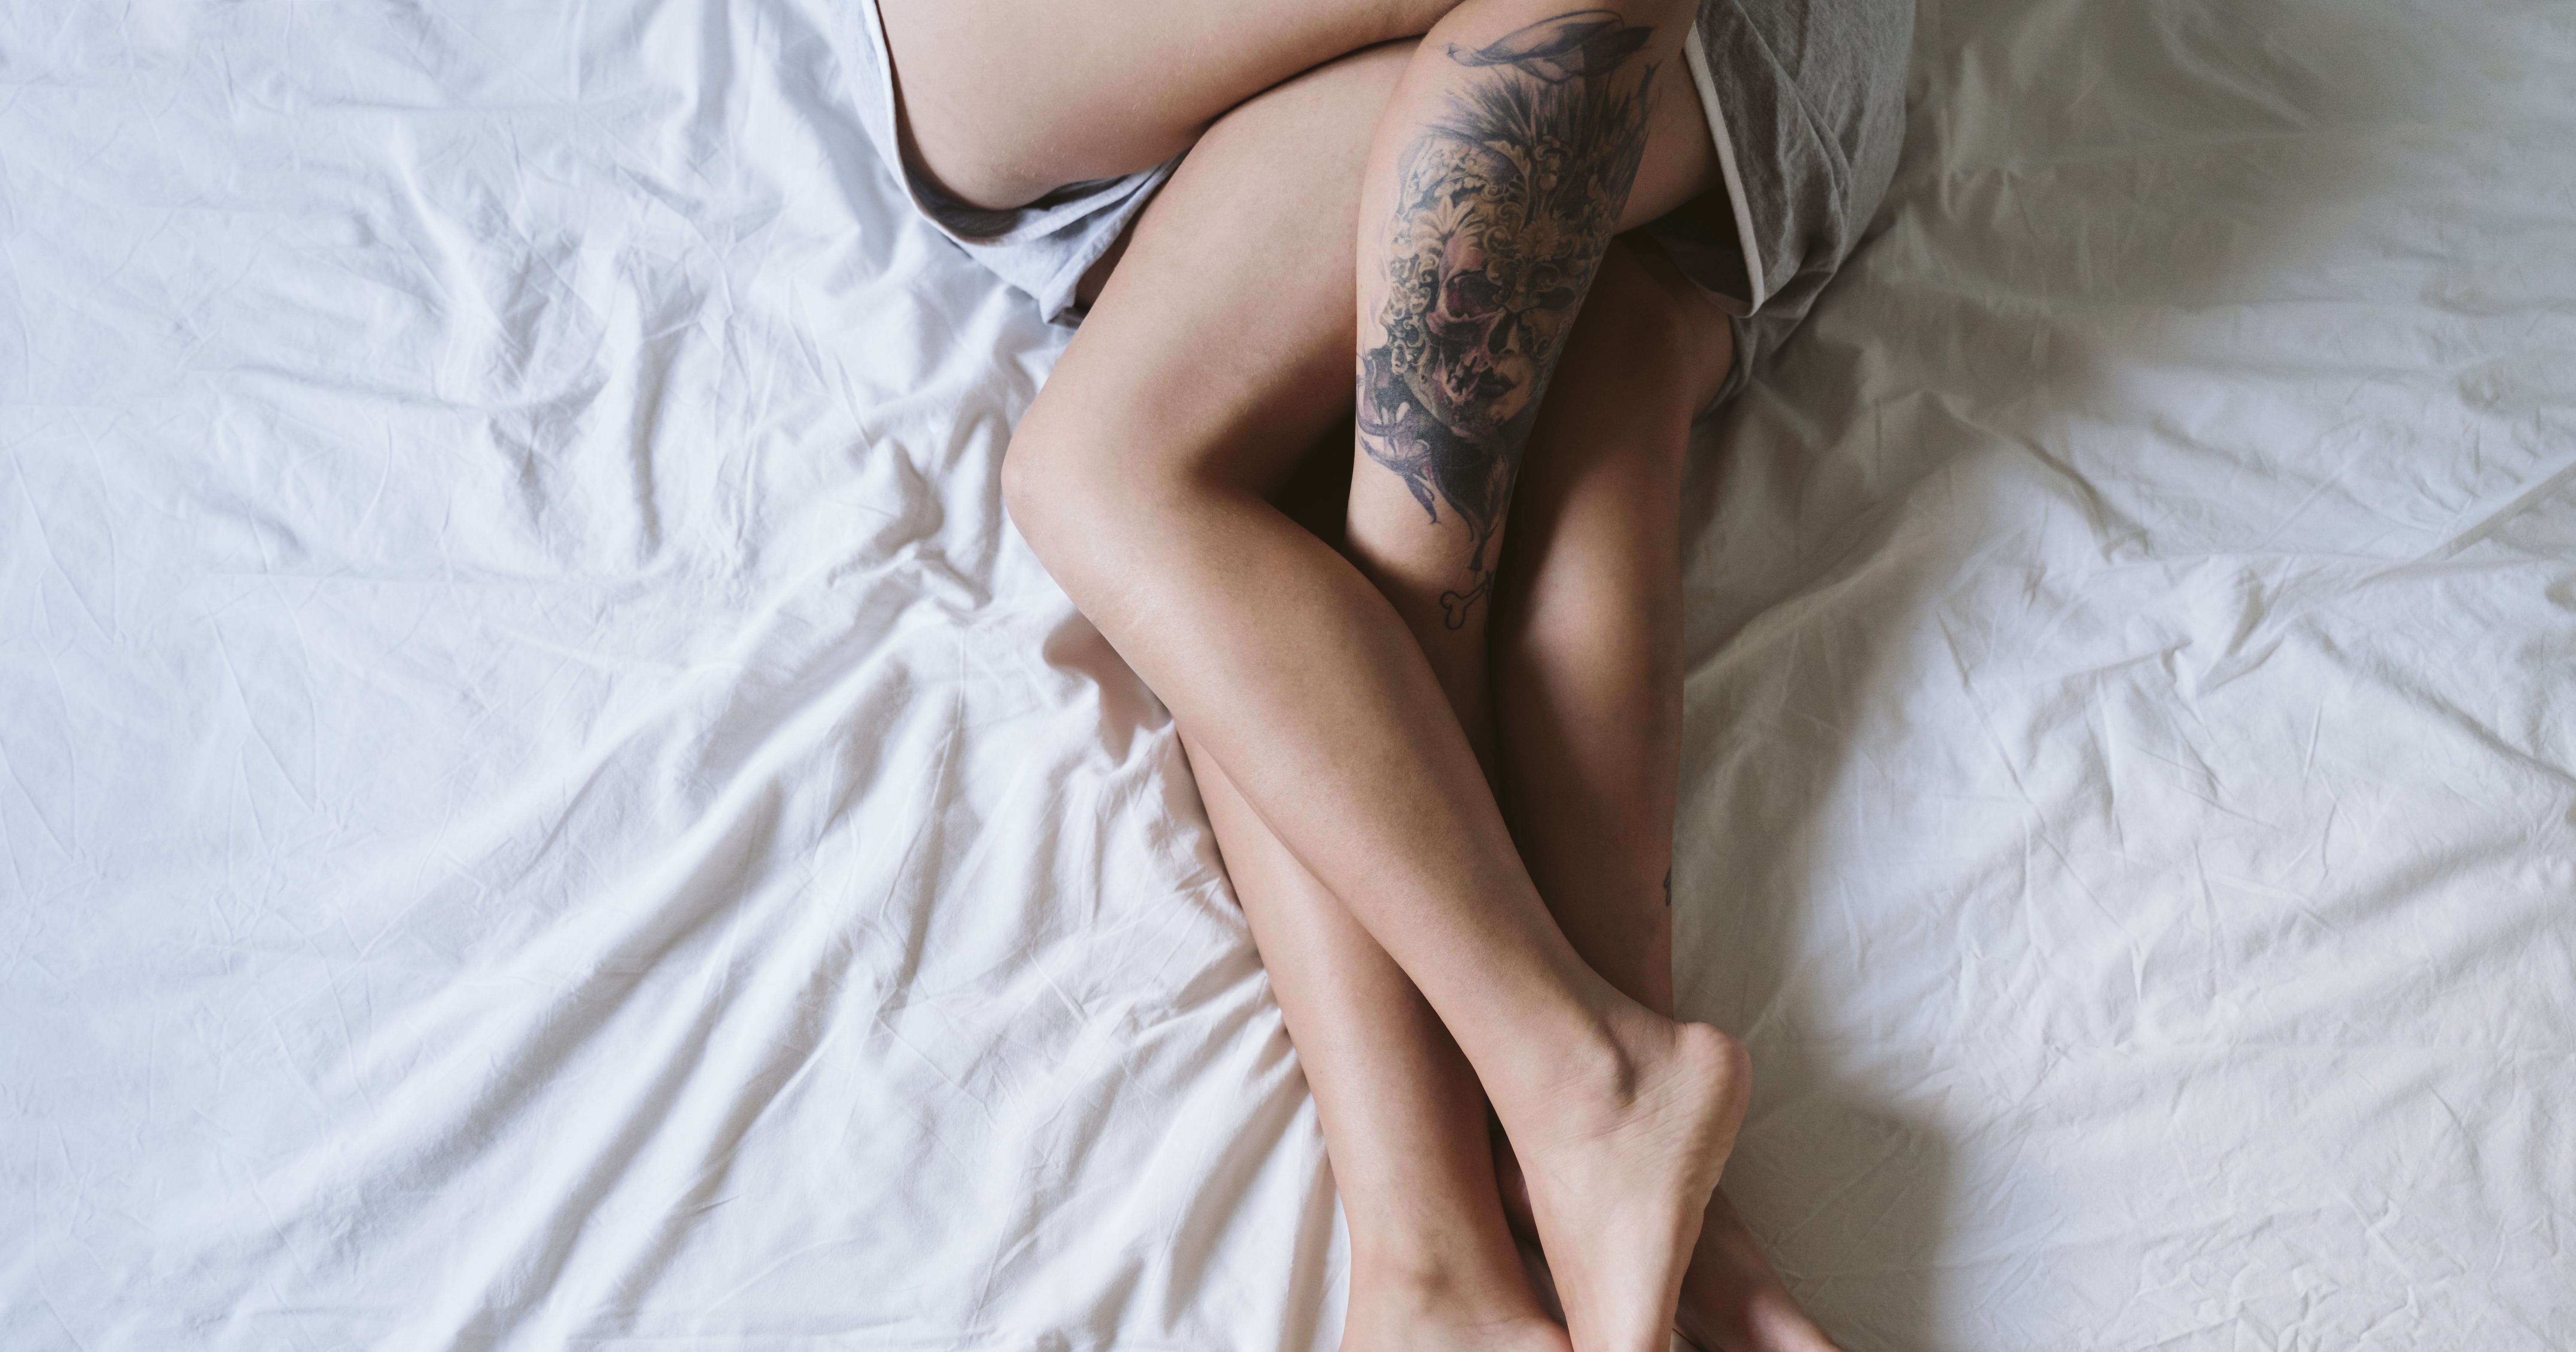 The Best Lesbian Sex Positions, According to 13 Lesbians